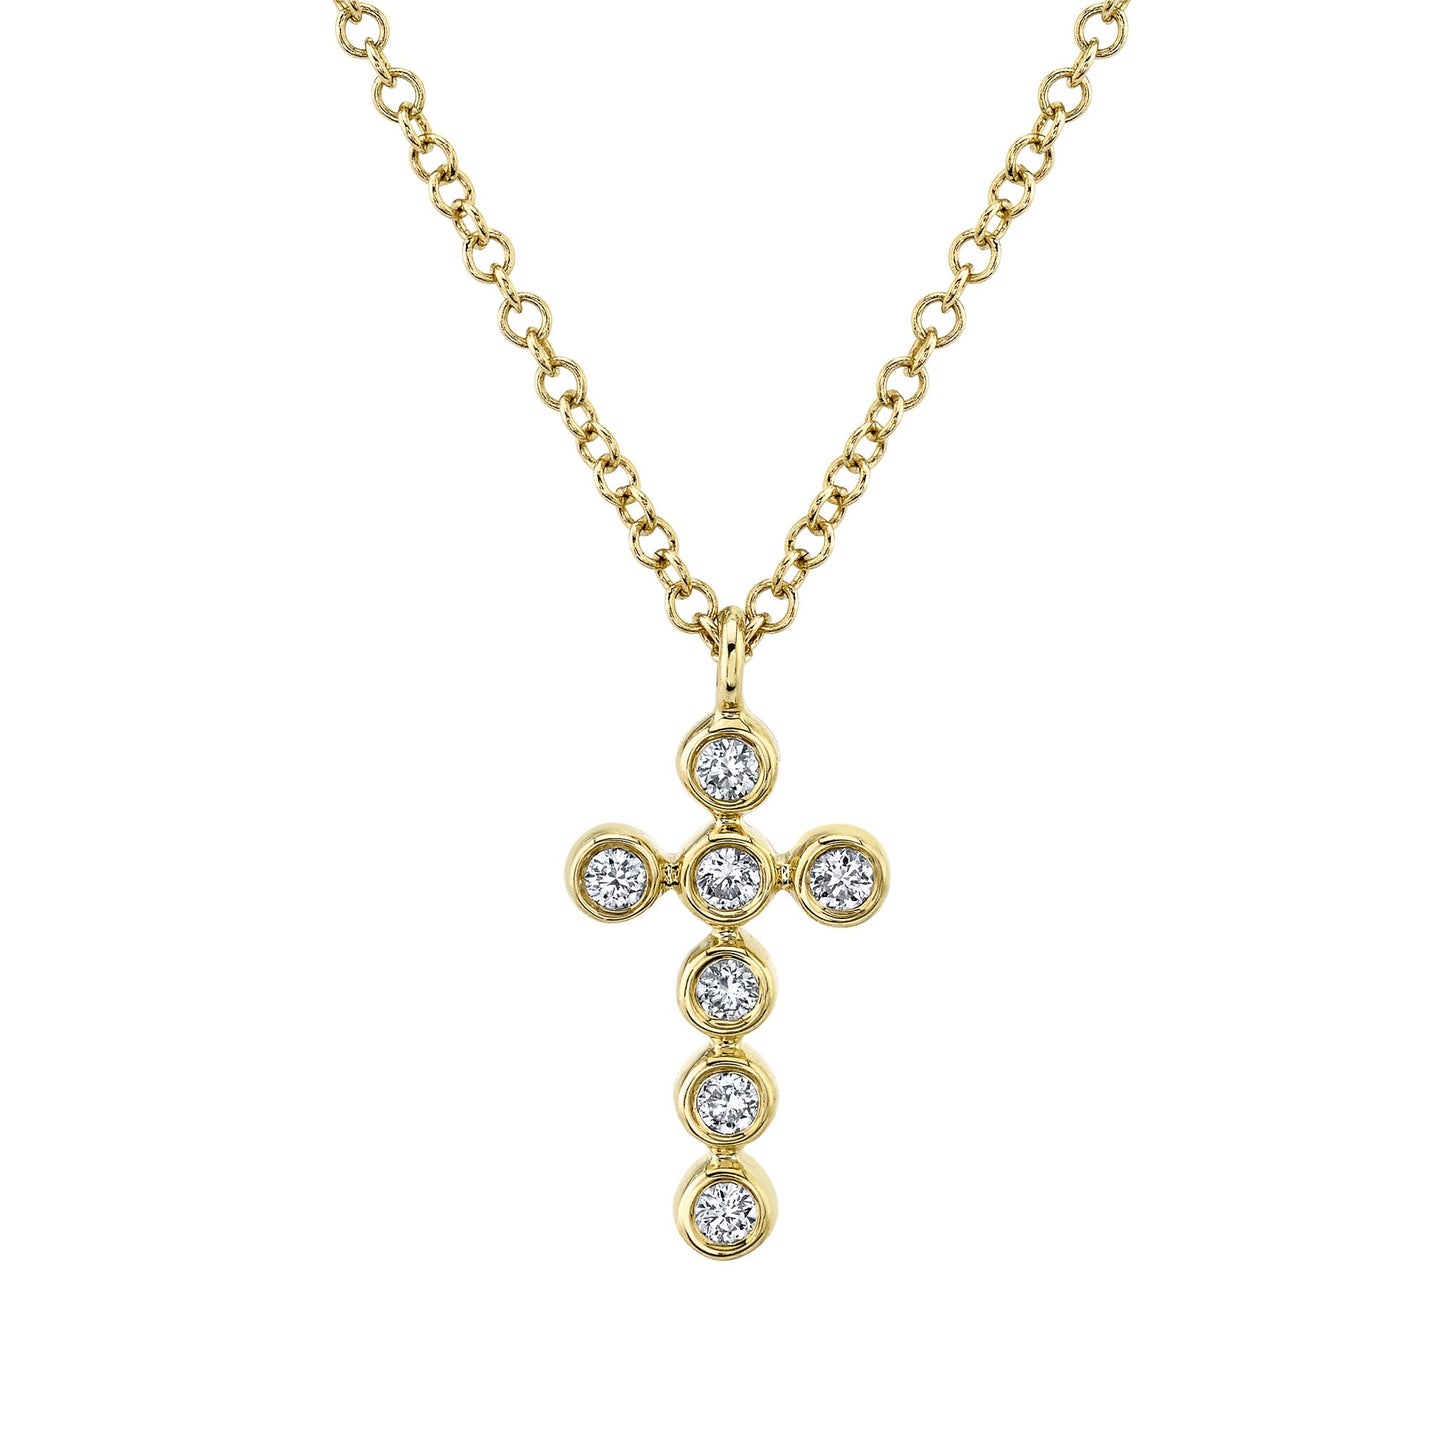 Gold and diamond cross necklace